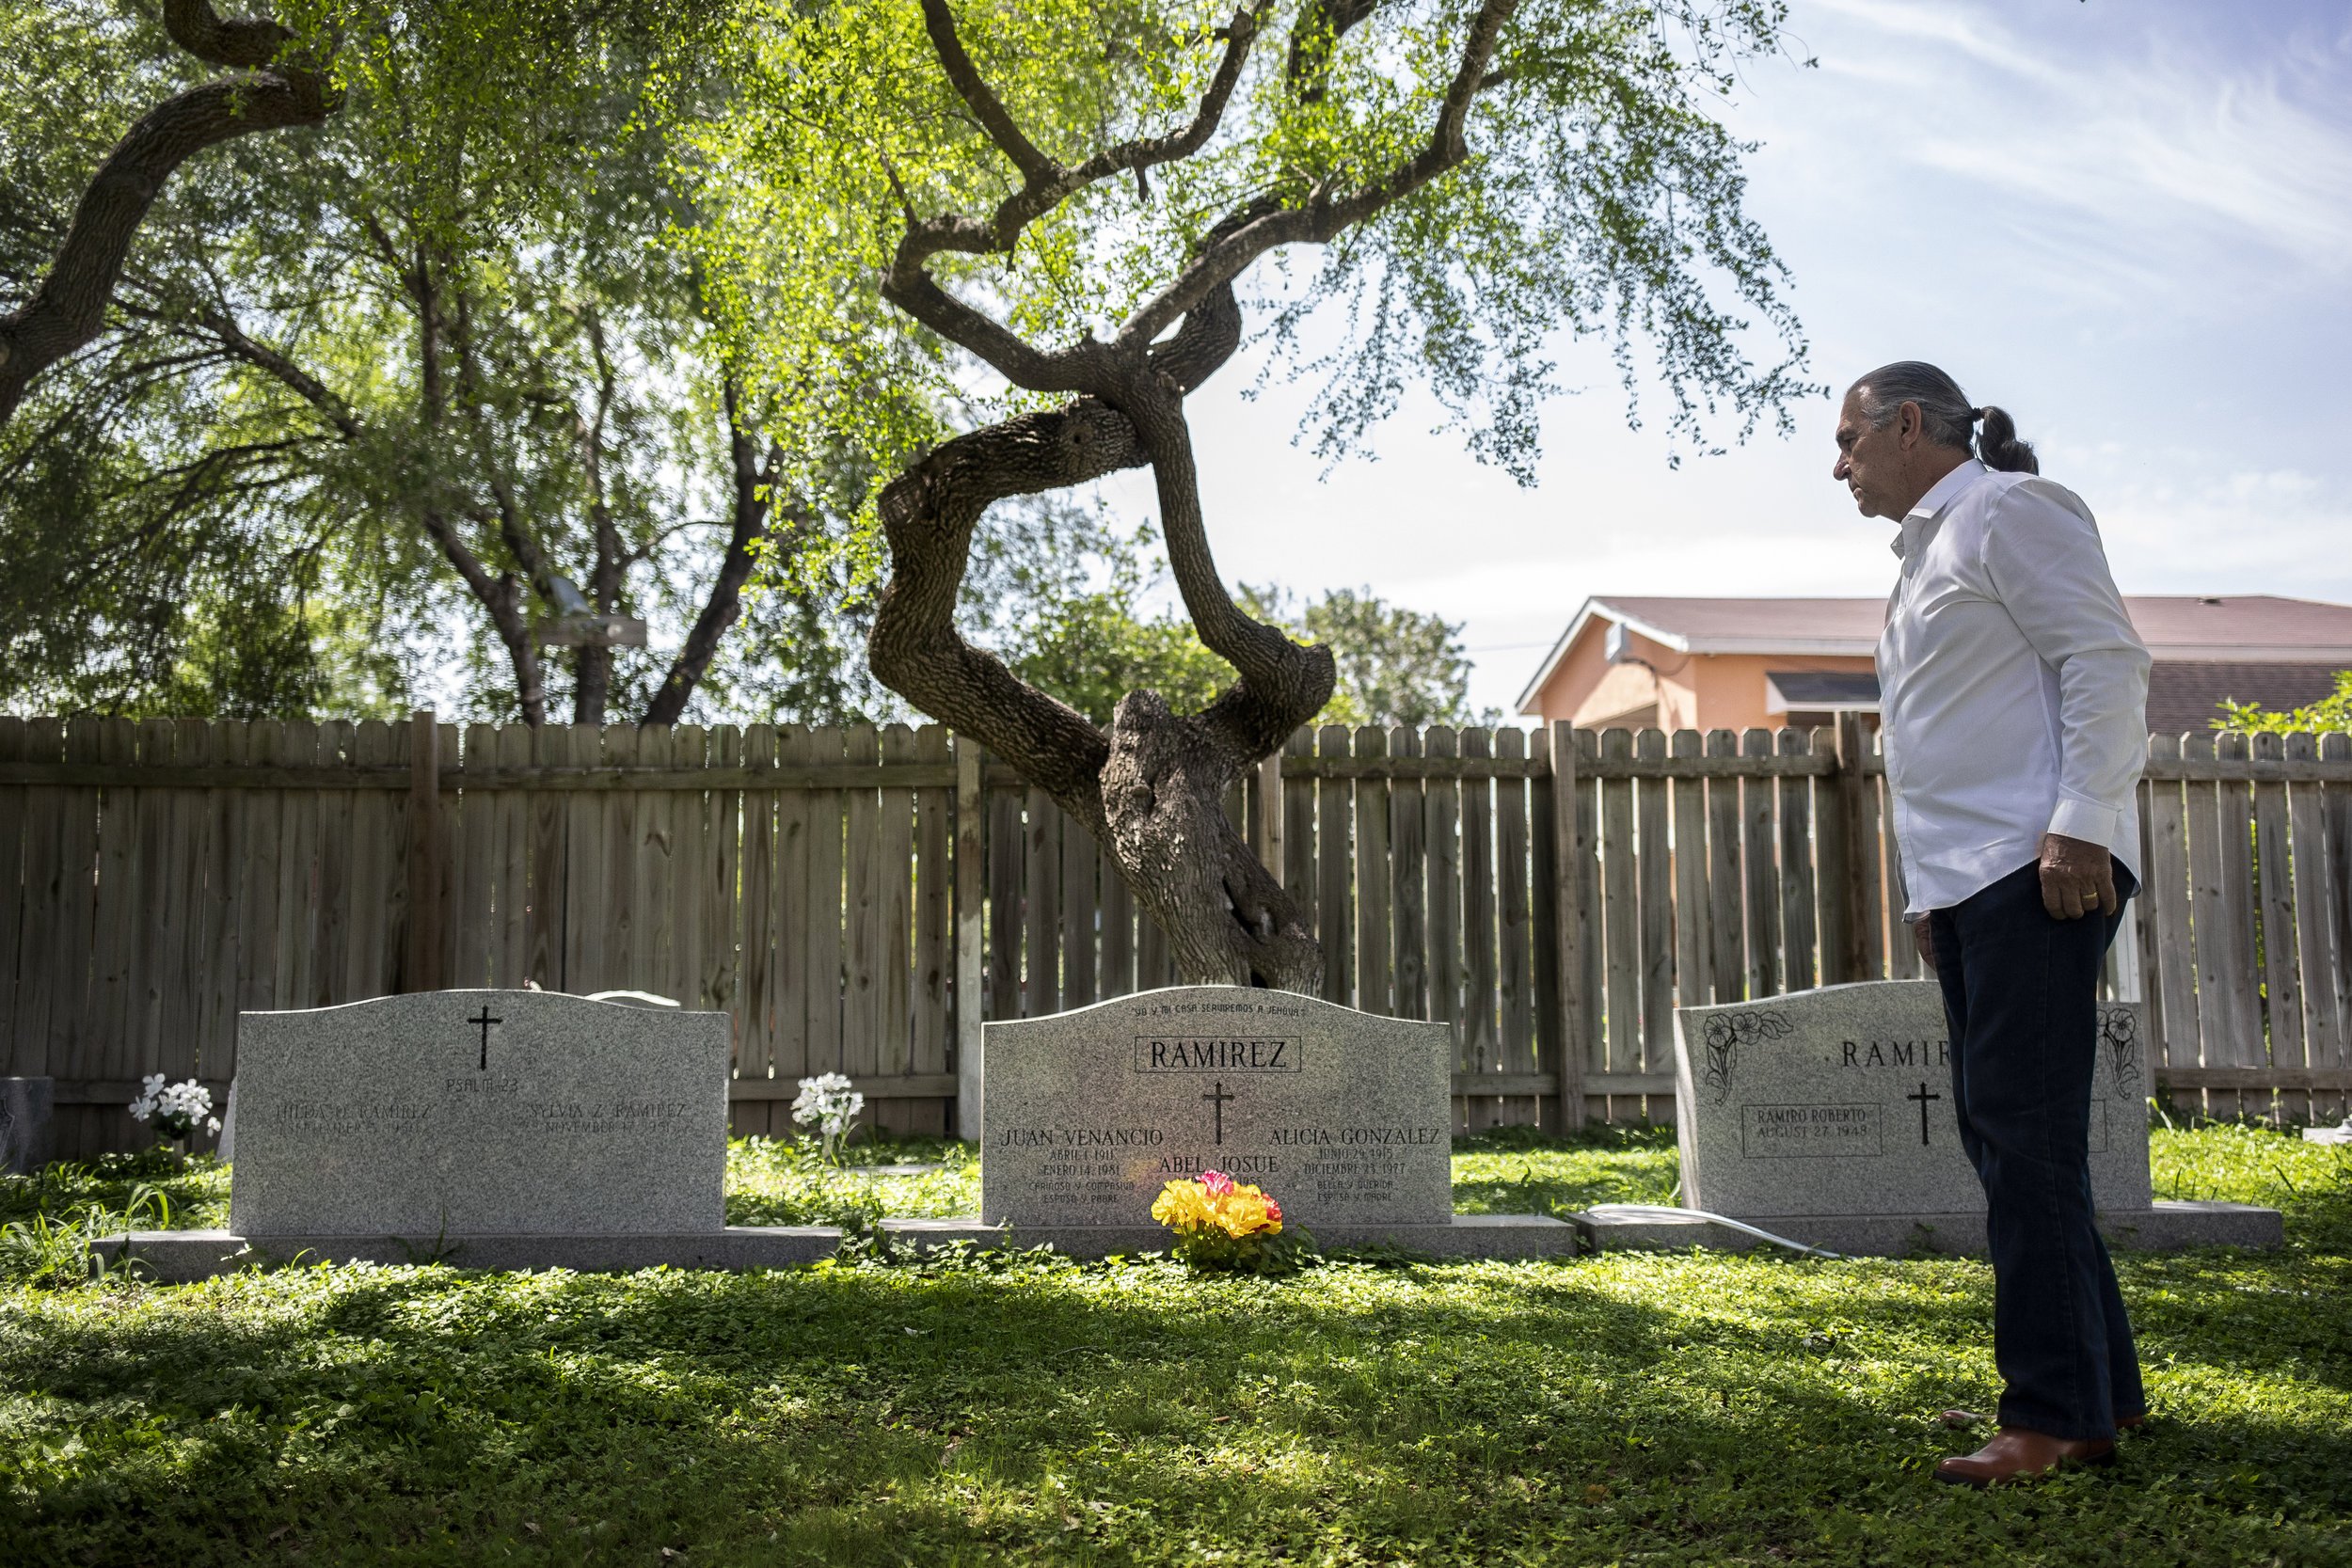  Ramiro Ramirez looks at the graves of his parents and the headstone for hiomself and his wife at the Jackson Chapel Cemetary in San Juan, TX. 